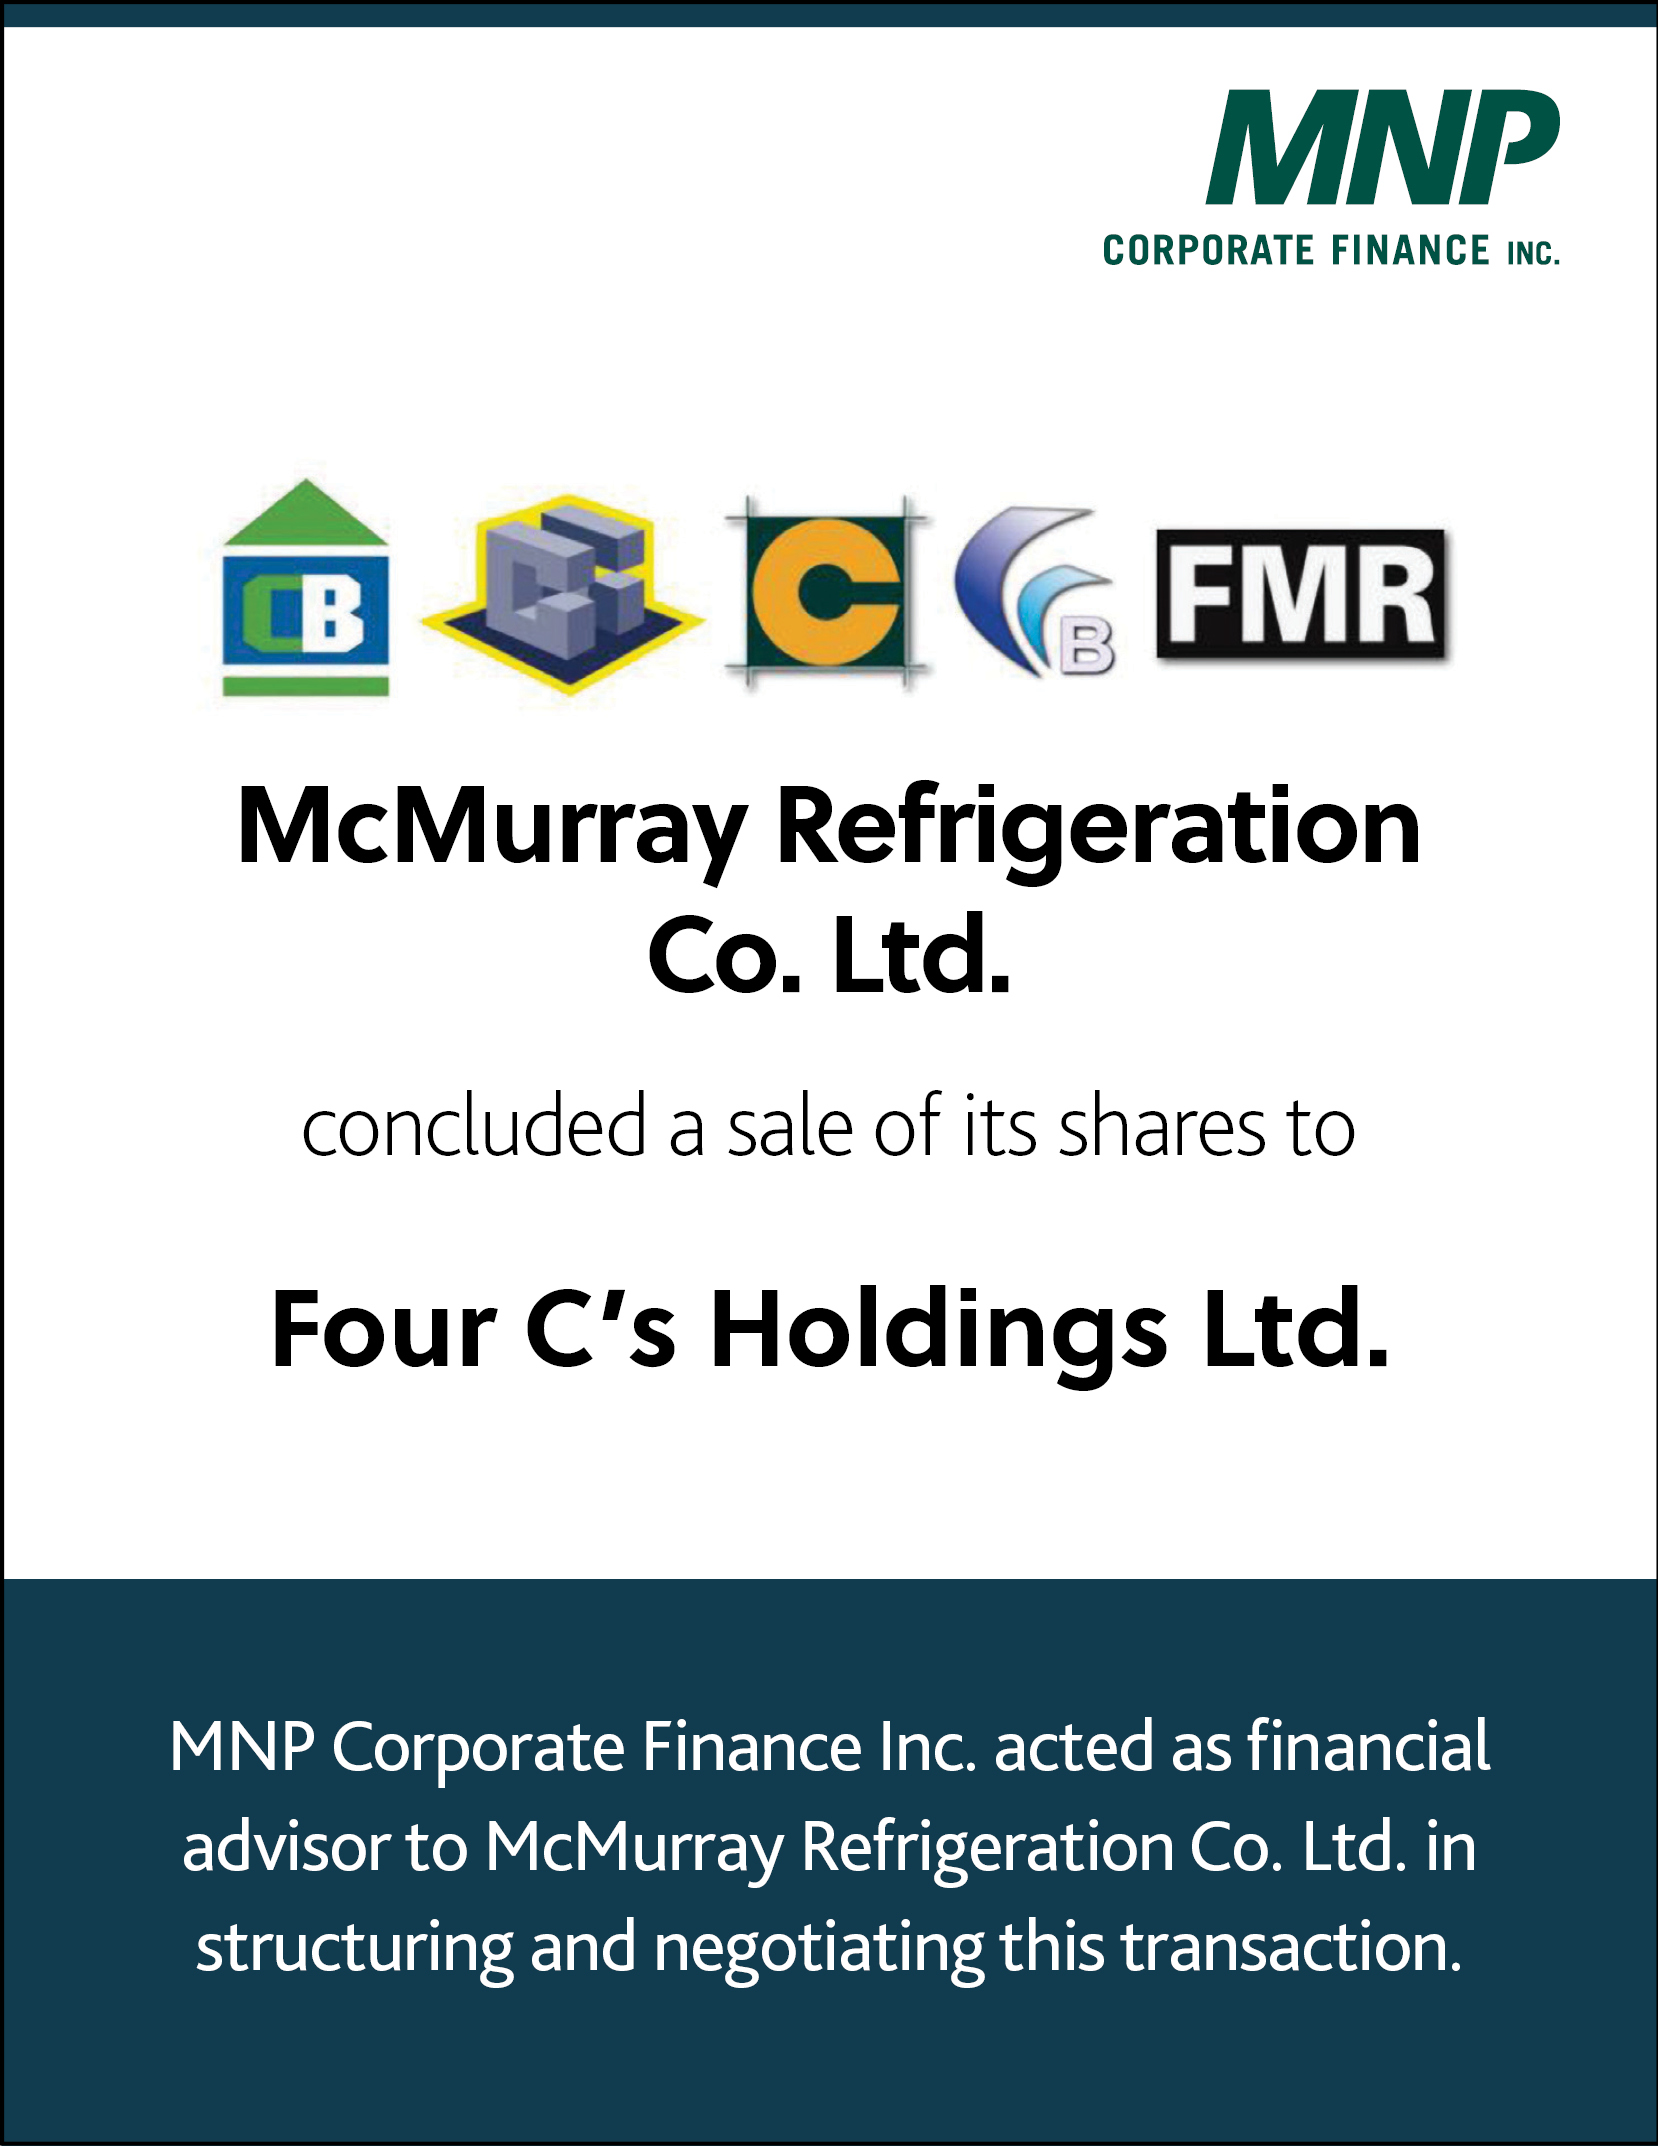 McMurray Refrigeration Co. Ltd. concluded a sale of its shares to Four C's Holdings Ltd.